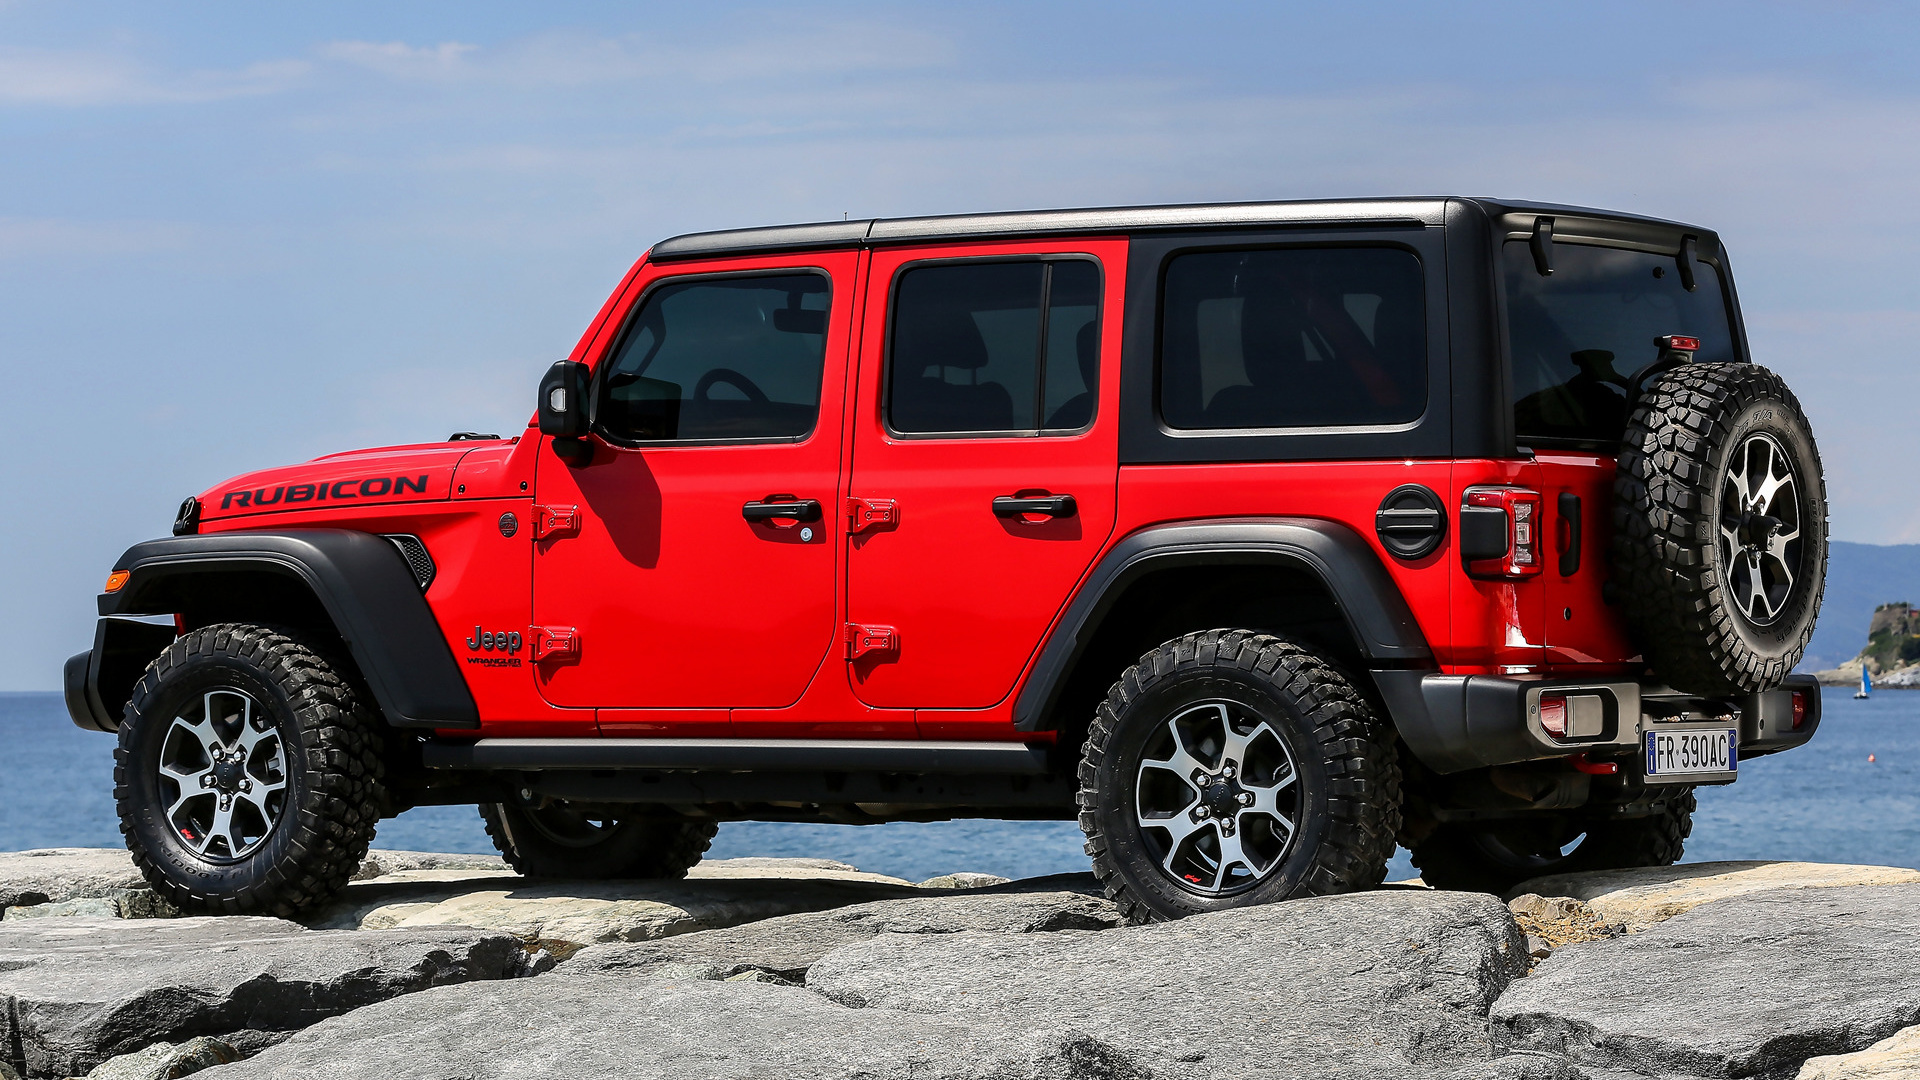 2018 Jeep Wrangler Unlimited Rubicon Hd Wallpaper Background Image 1920x1080